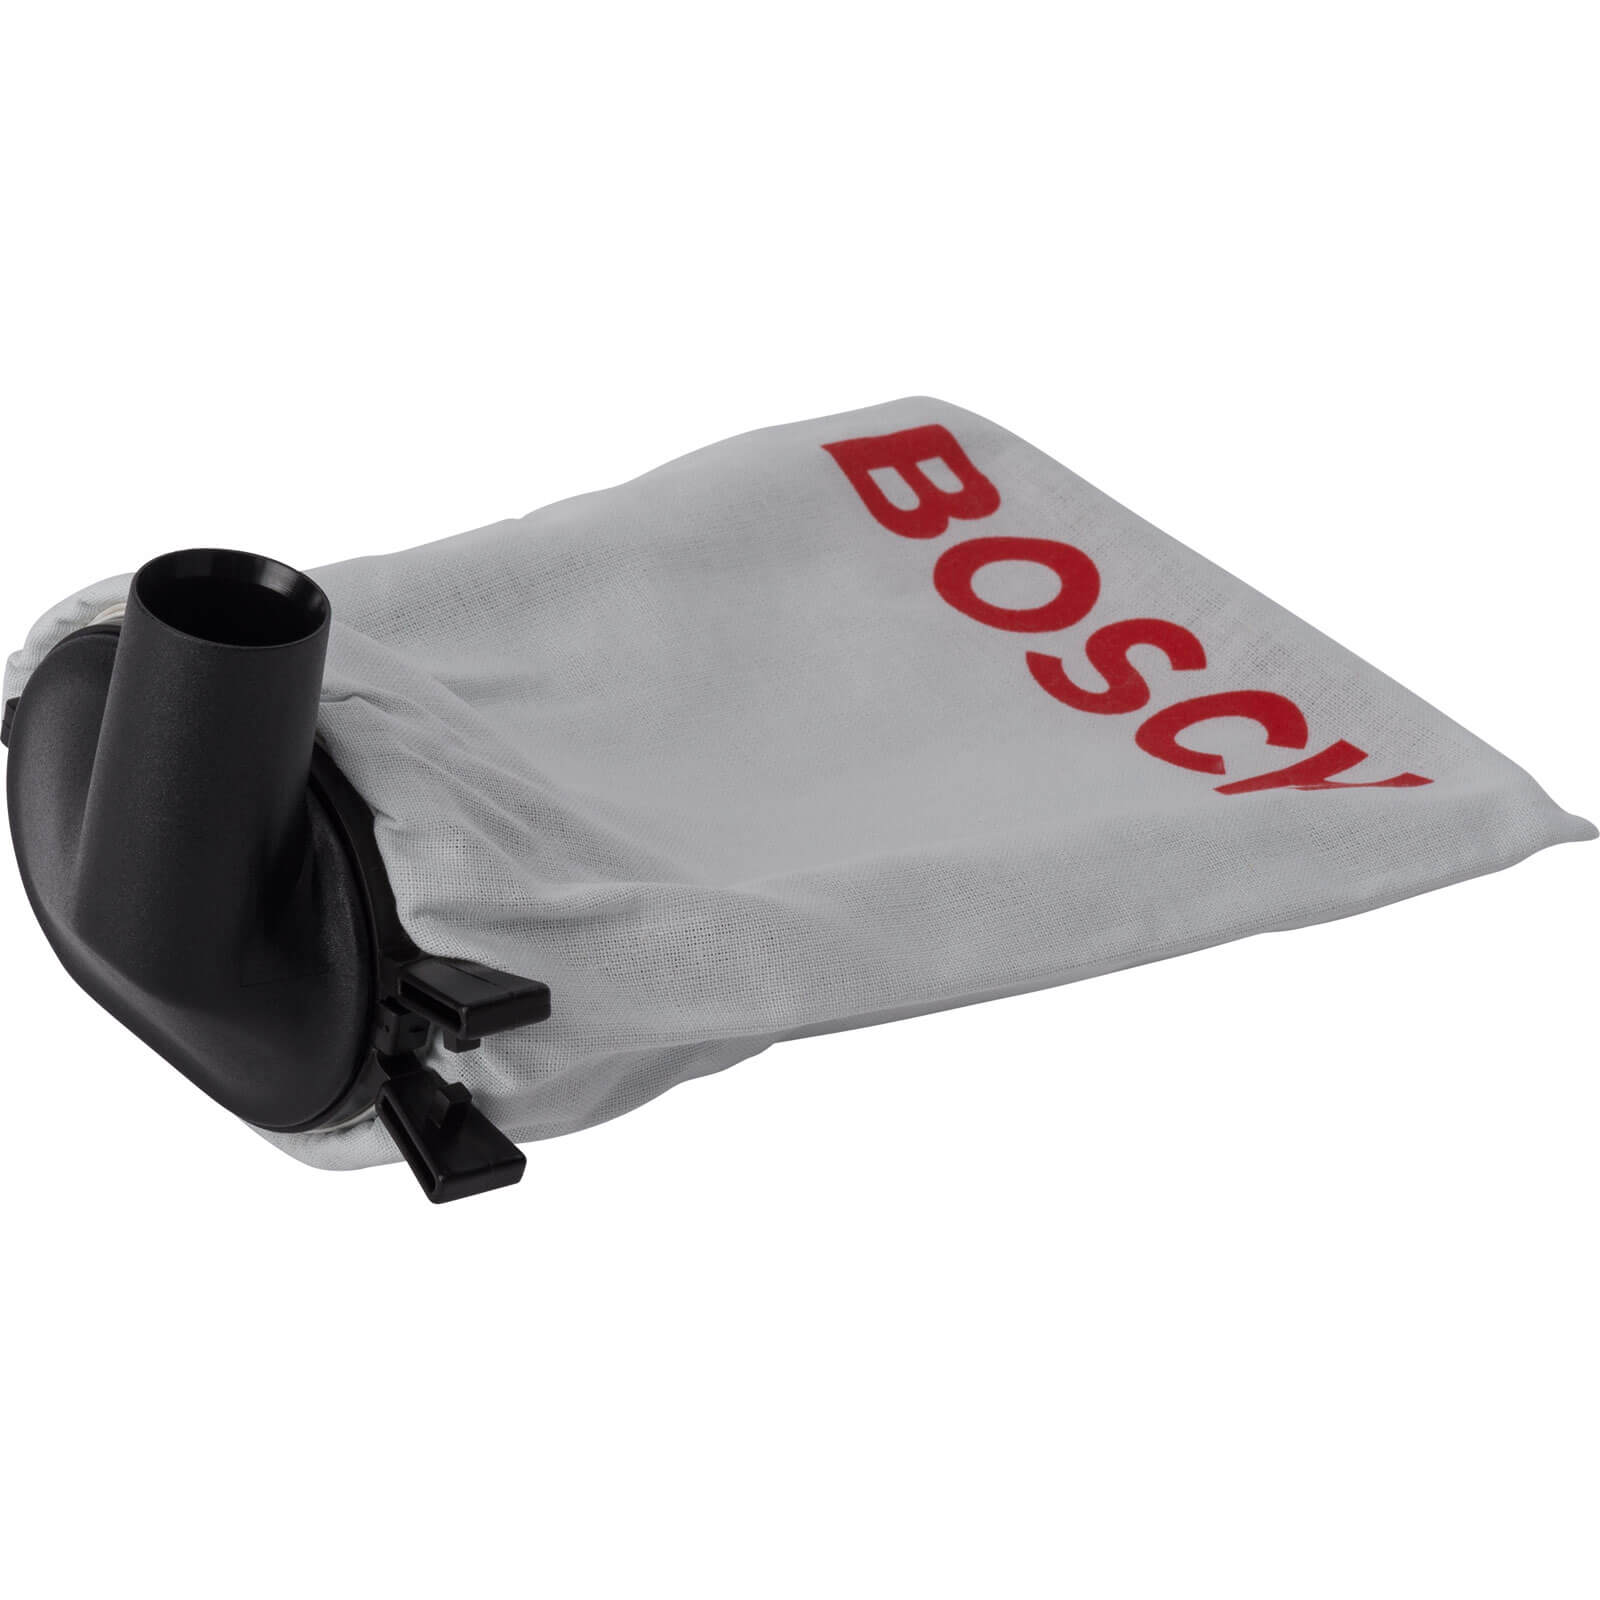 Image of Bosch Dust Bag for PBS 60 and PEX 115 and 125 Sanders